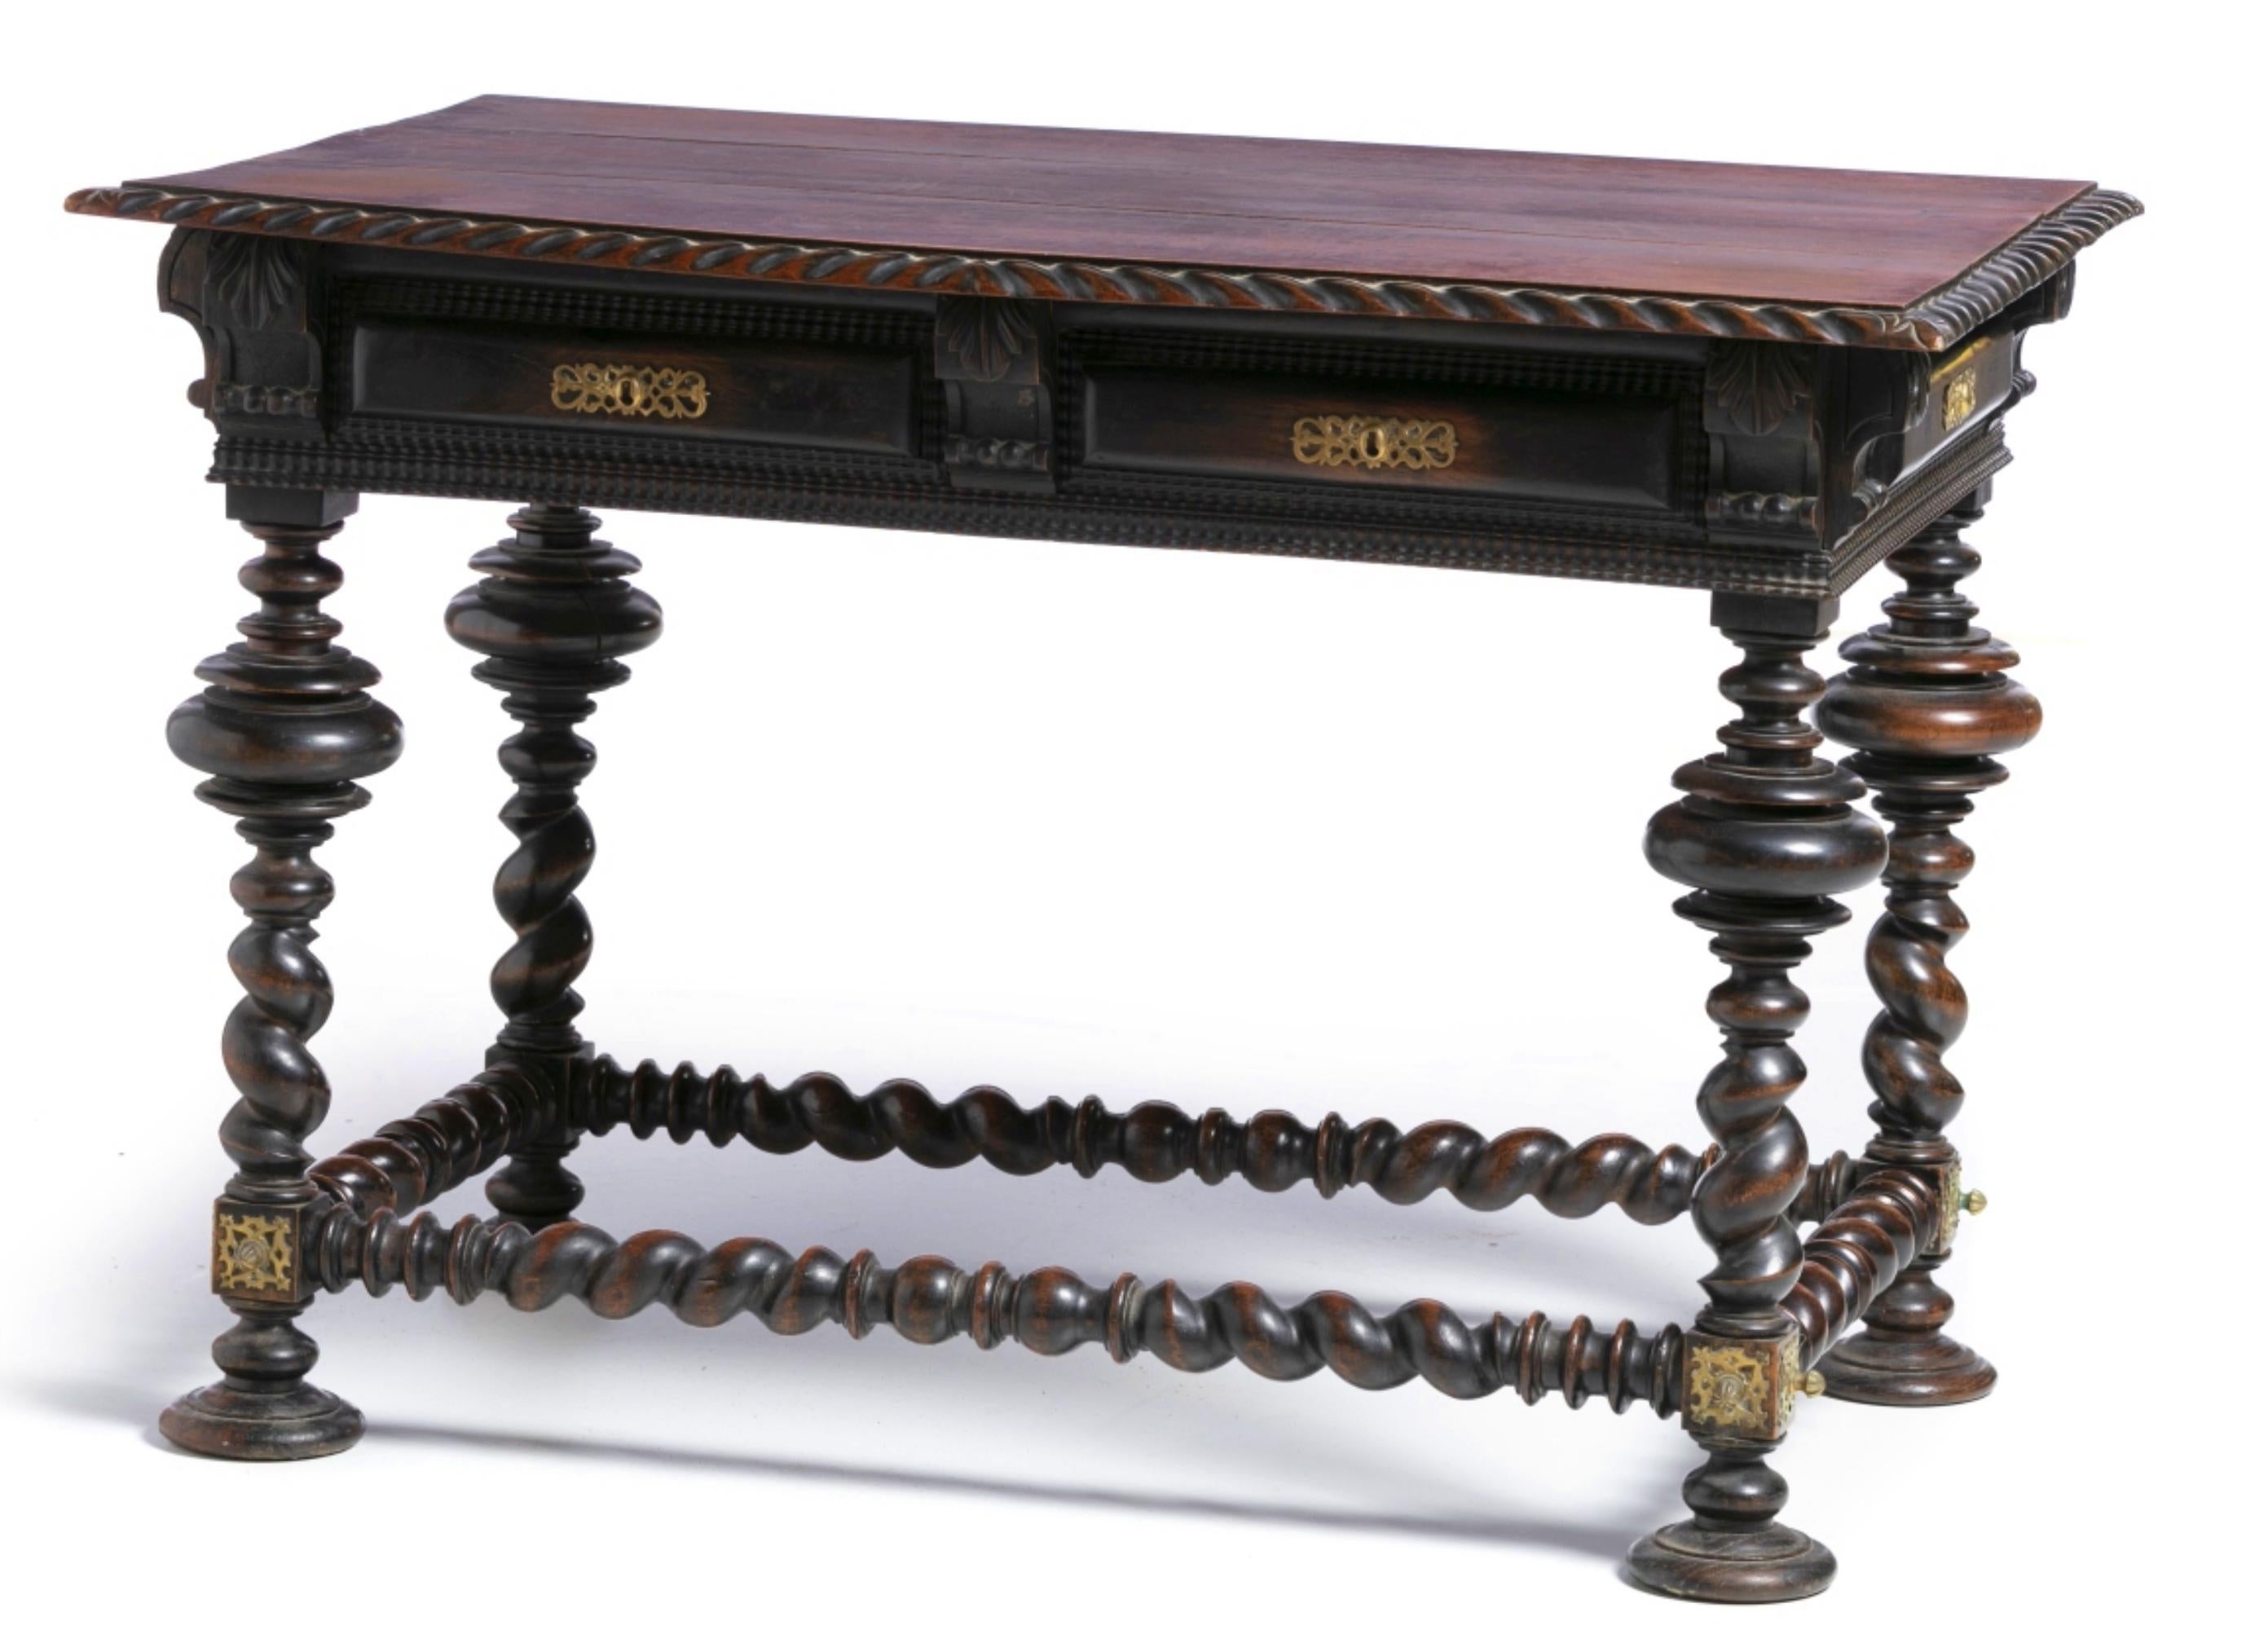 Portuguese buffet table, 19th century
of shaky and twisted walnut wood with 2 drawers simulating 4. 
Tracery brass fittings, resting on turned legs. 
Minor defects. 
Dimensions: 82 x 116 x 73 cm.